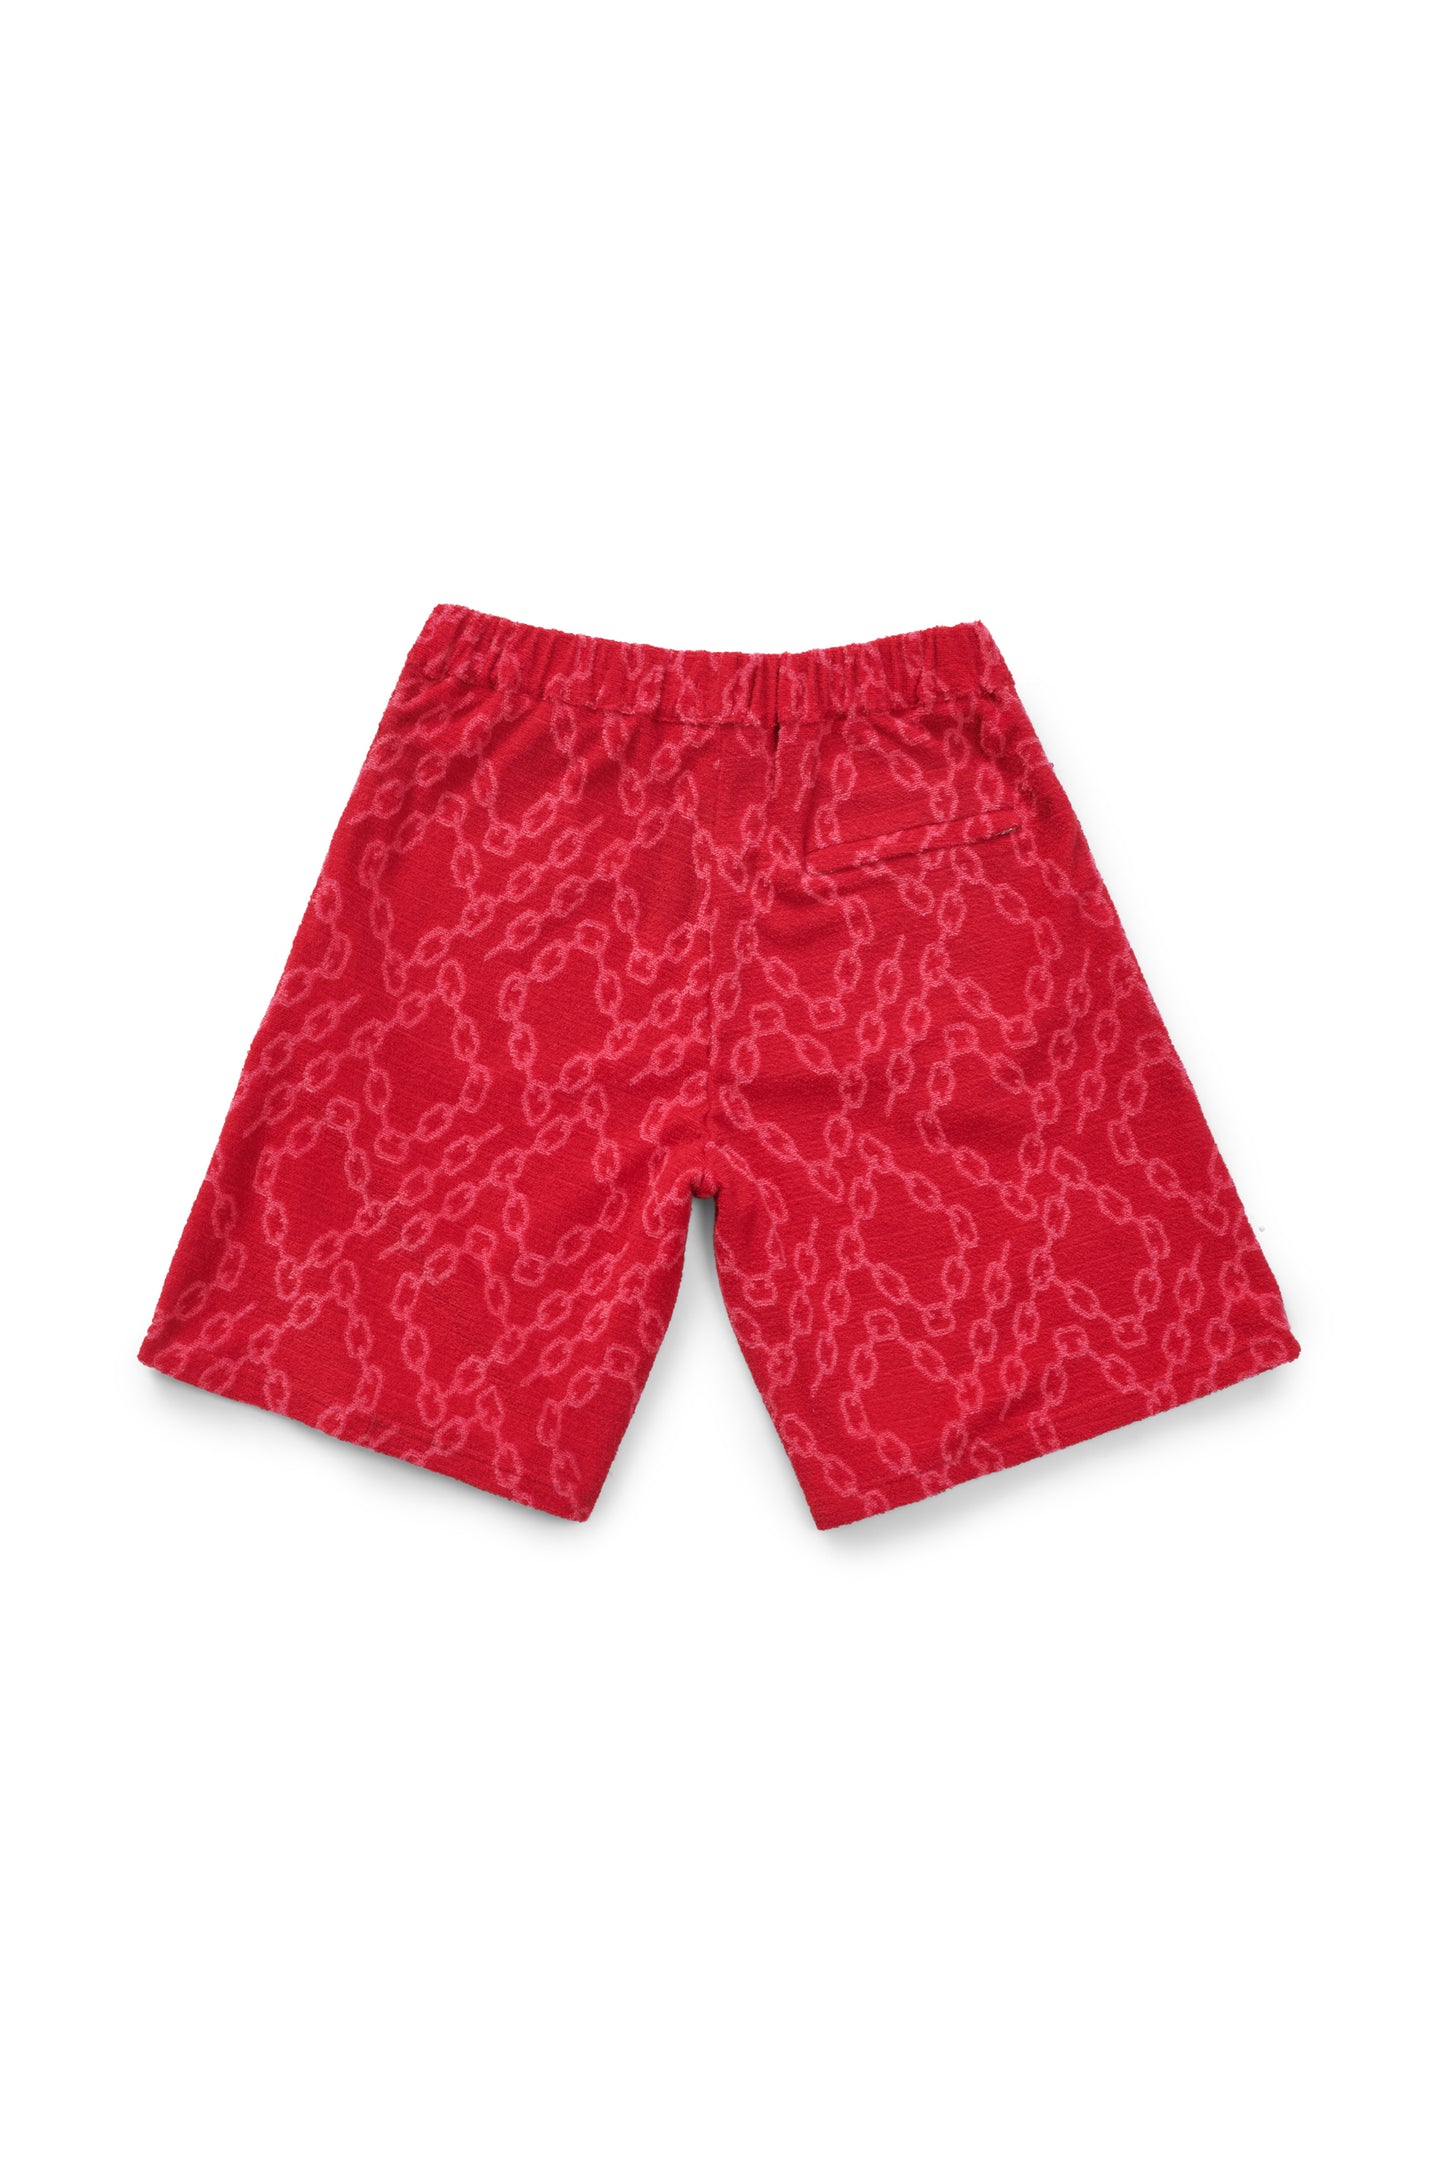 P419 TERRY TOWEL SHORT - Fiery Red